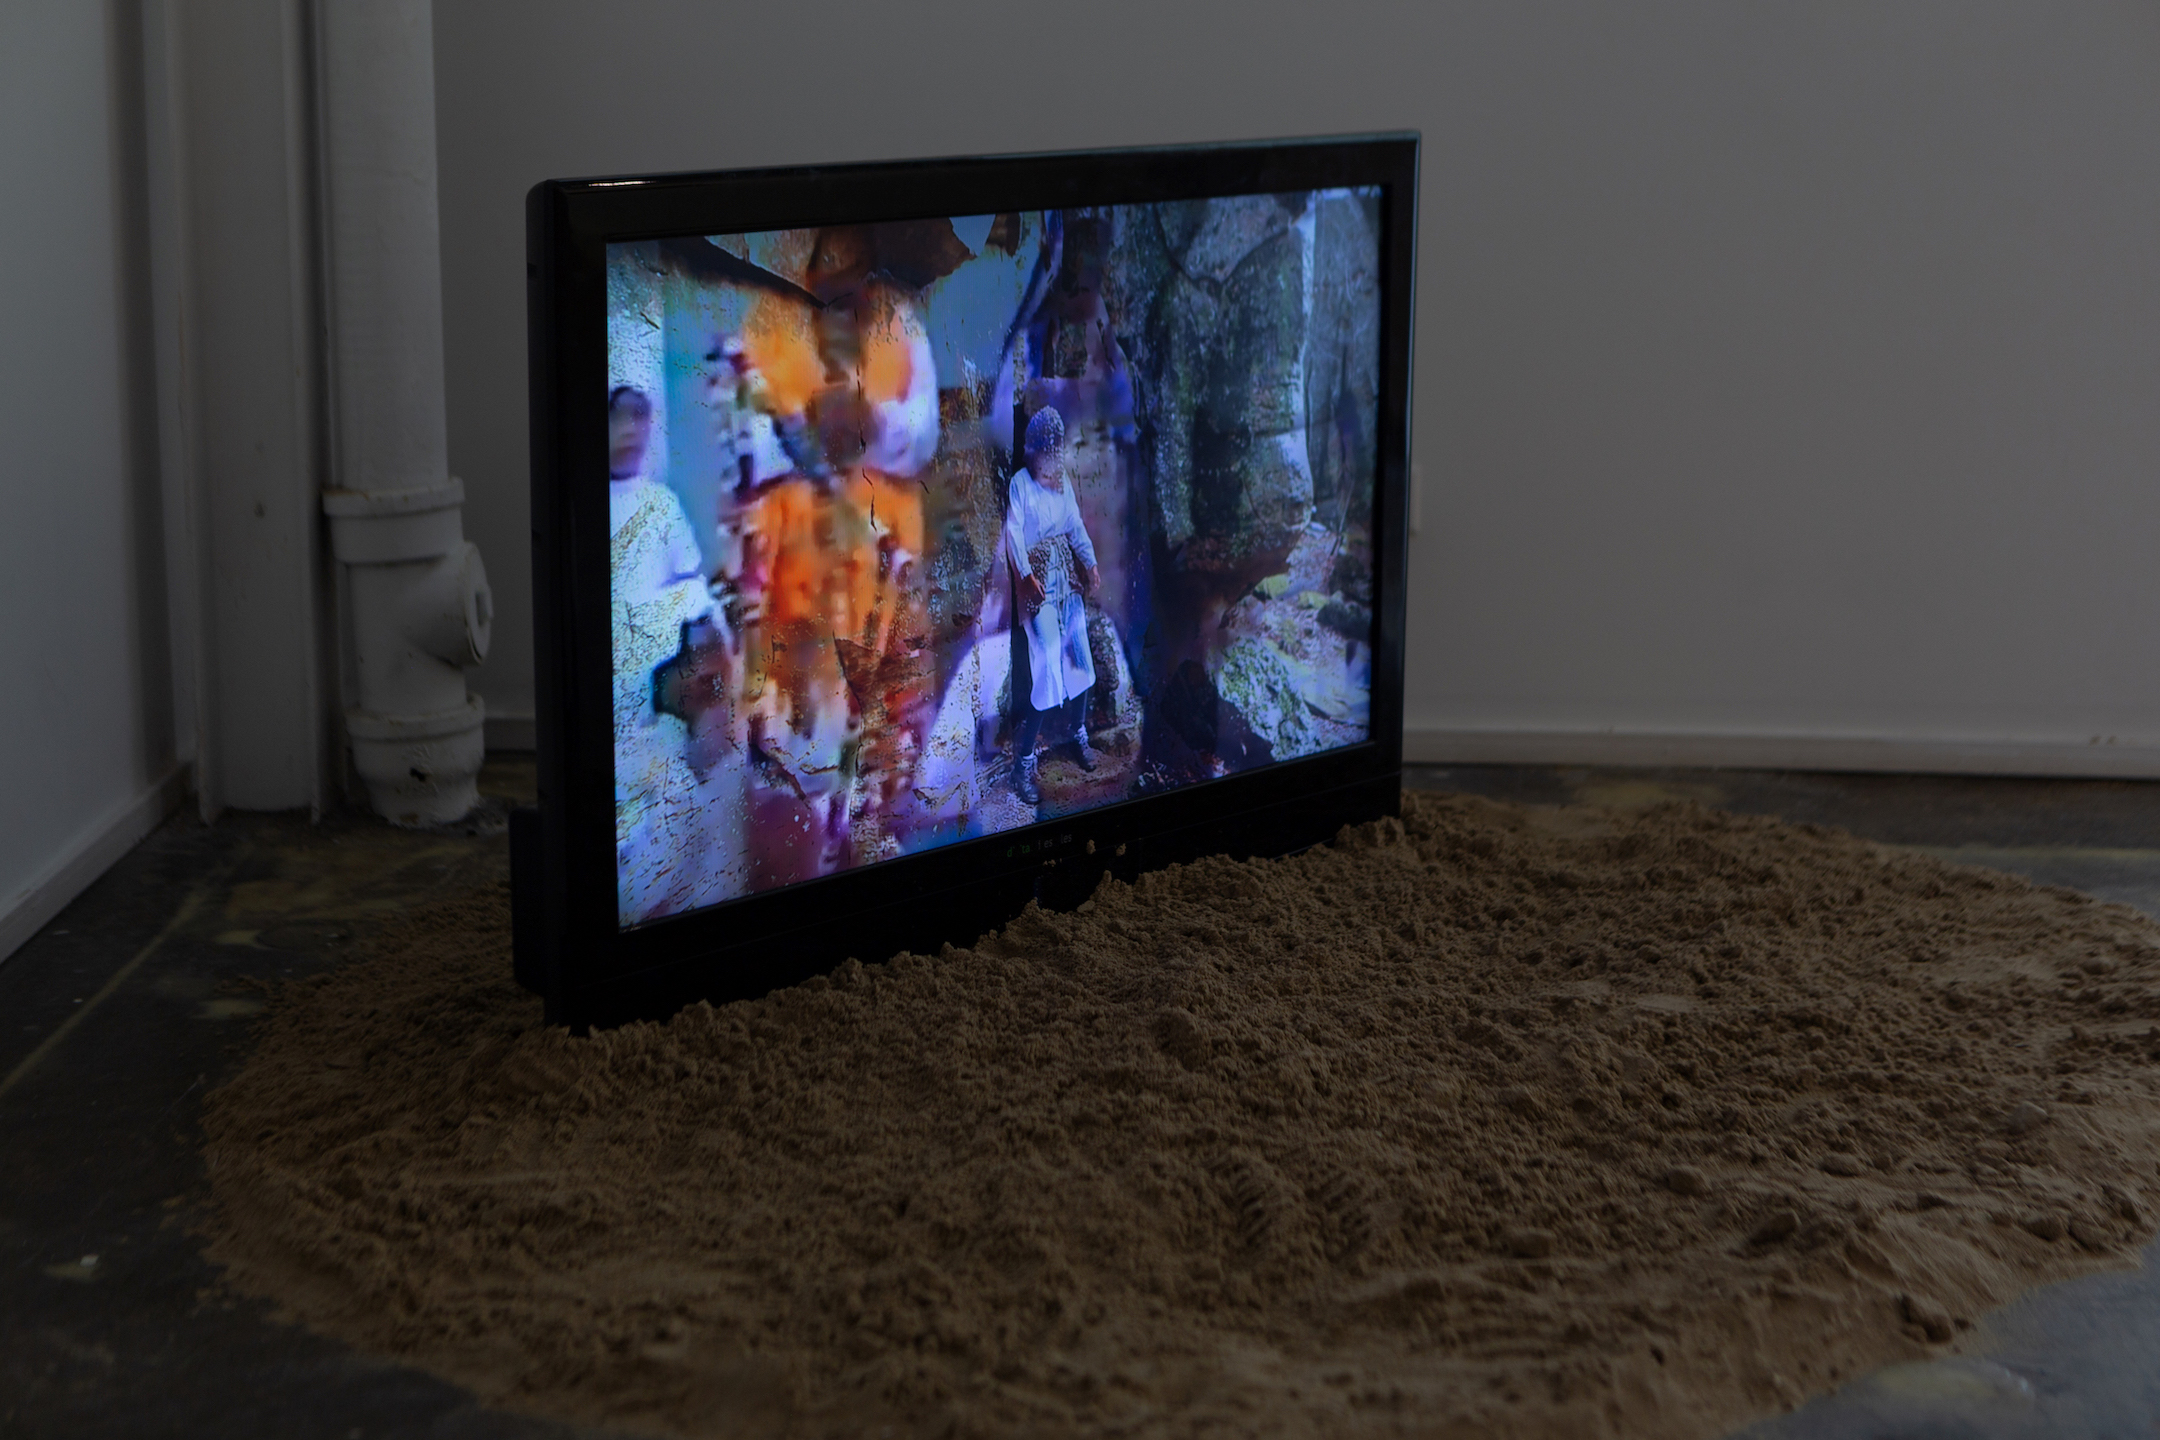 Uninhibited: People of the earth (2022), Video Installation, 12 minutes and 1 second